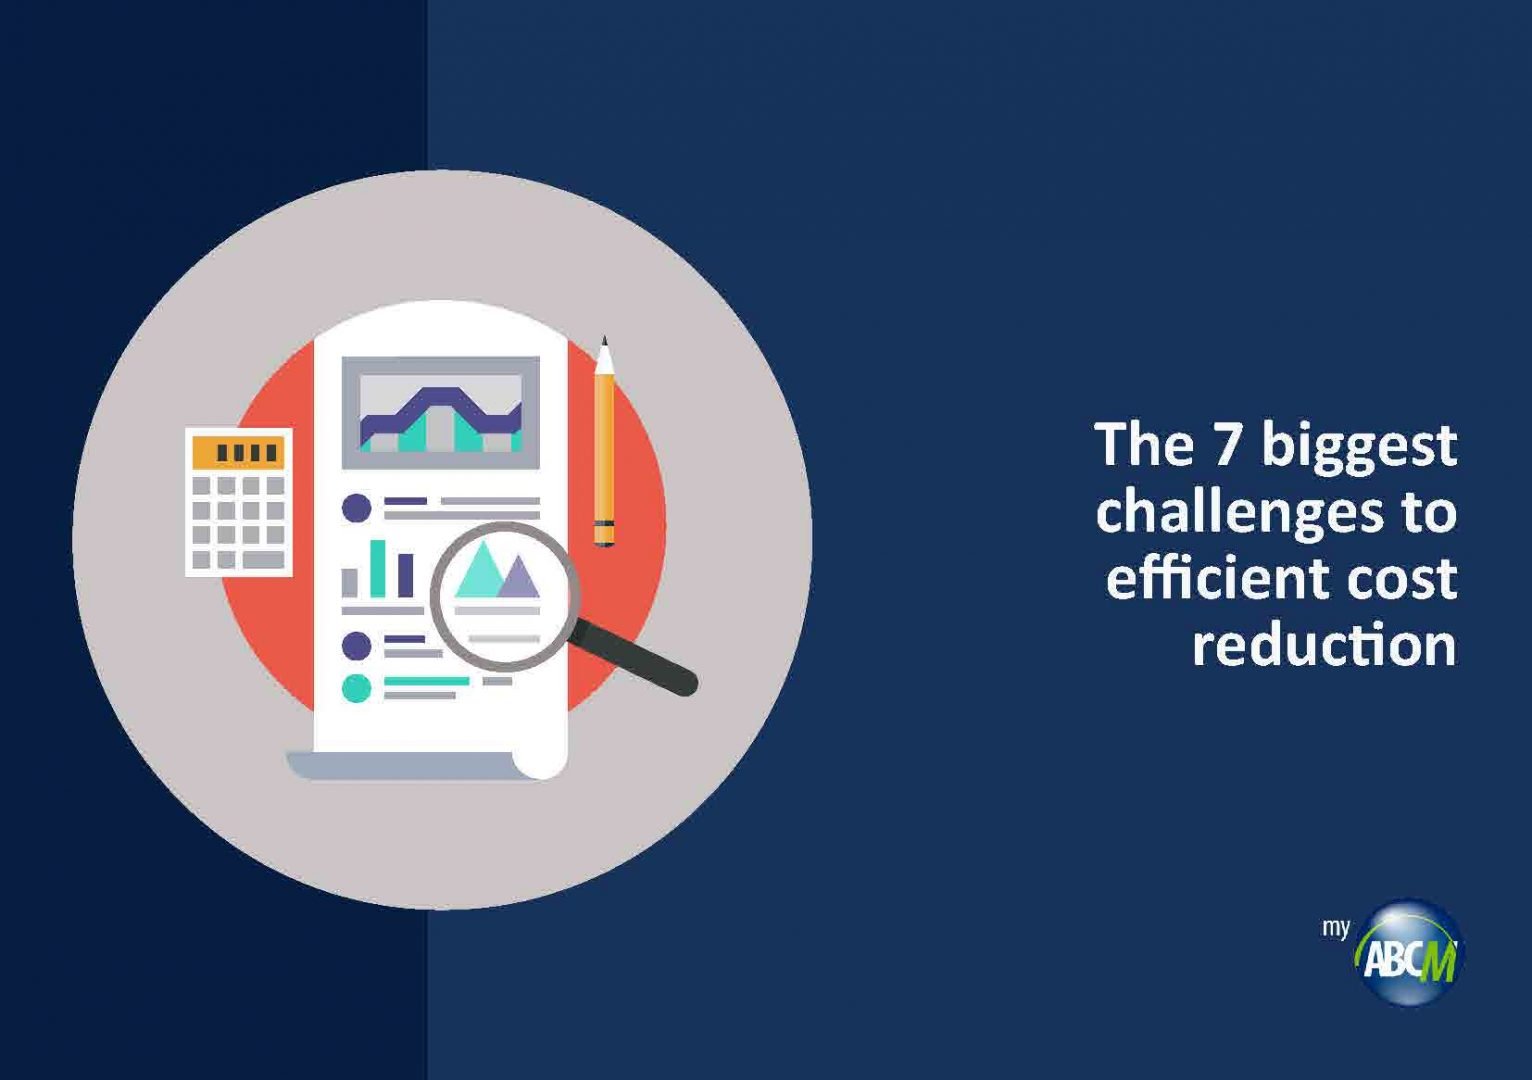 ebook 1 - The 7 biggest challenges to efficient cost reduction